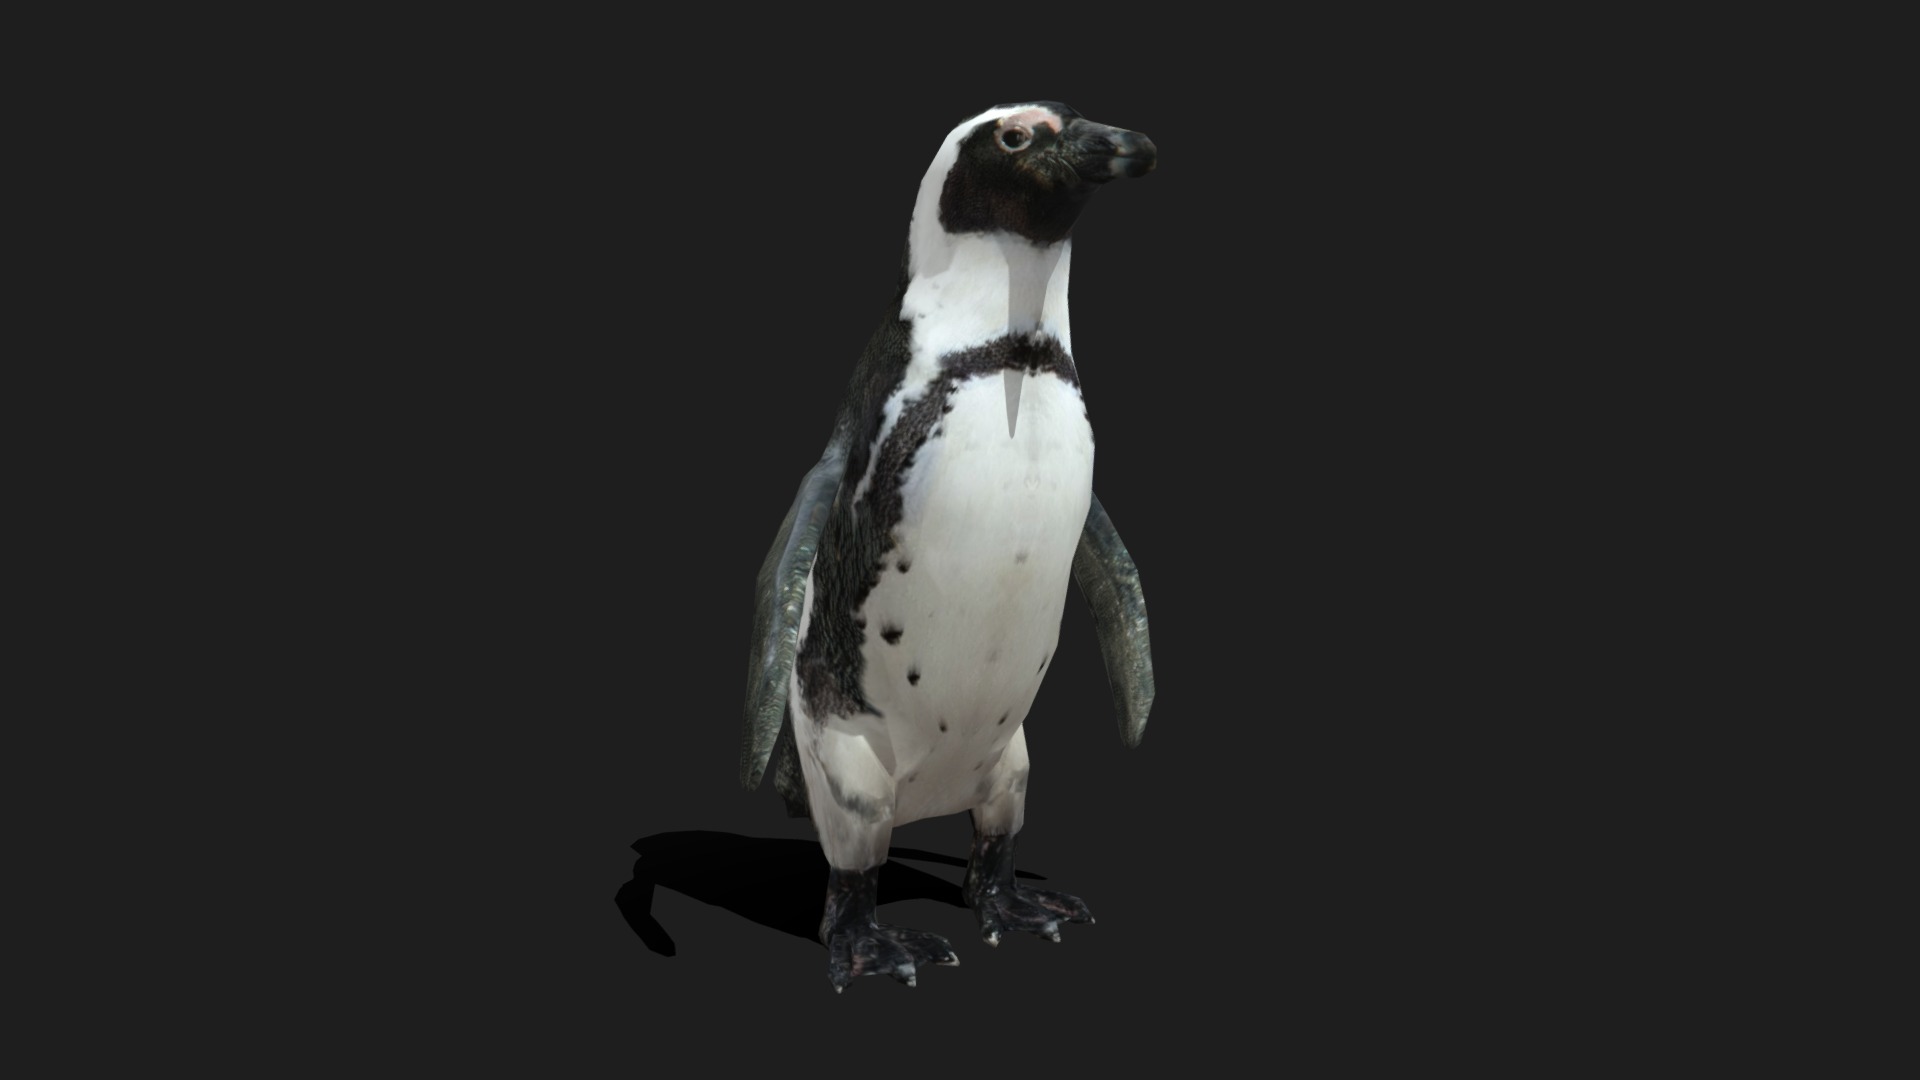 3D model Low Poly African Penguin - This is a 3D model of the Low Poly African Penguin. The 3D model is about a penguin standing on a stool.